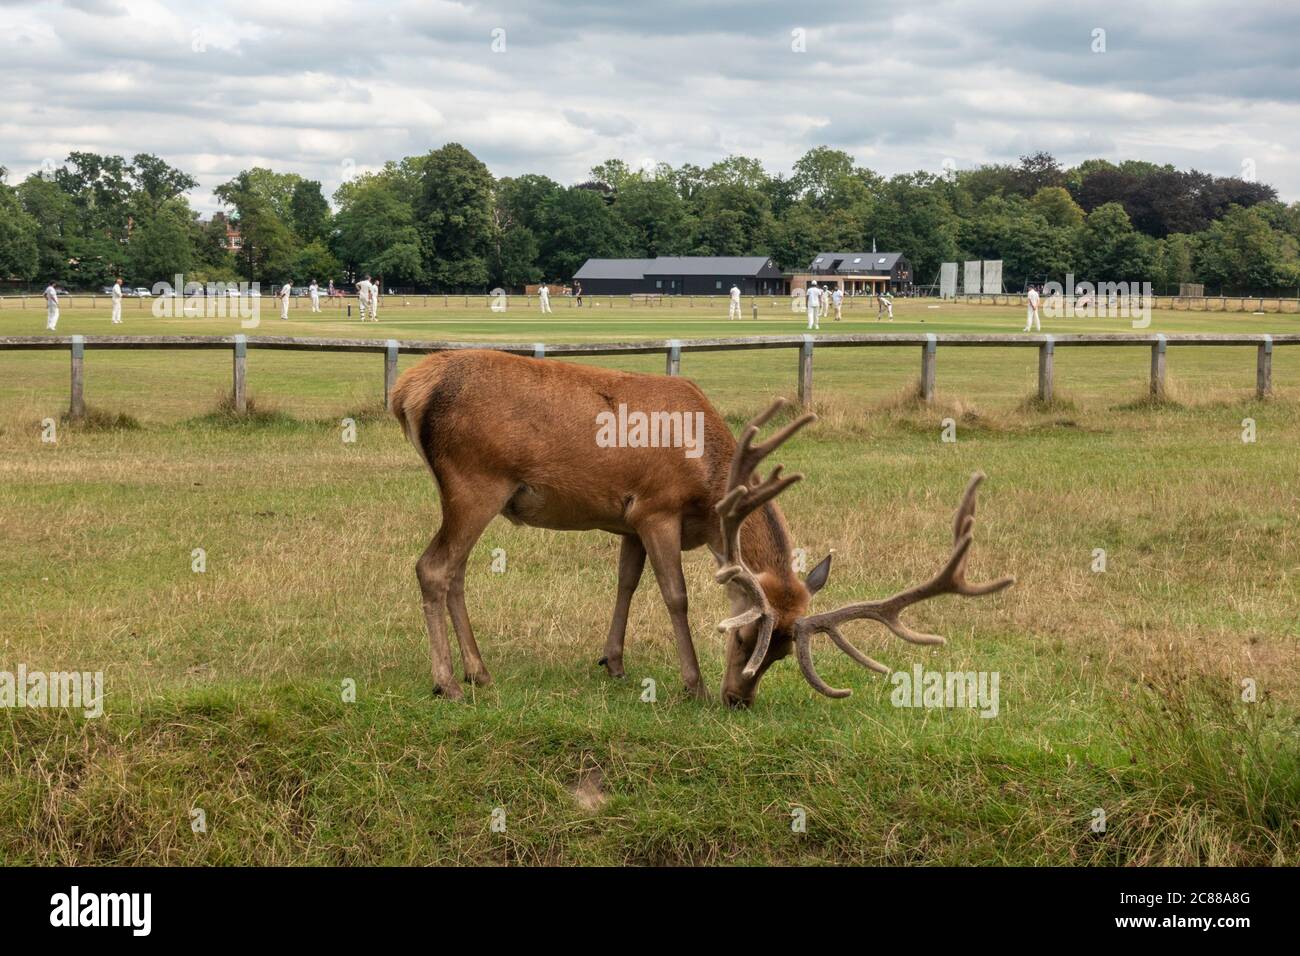 A large male stag red deer grazing in front of a game of cricket in Bushy Park, Richmond upon Thames, UK. Stock Photo